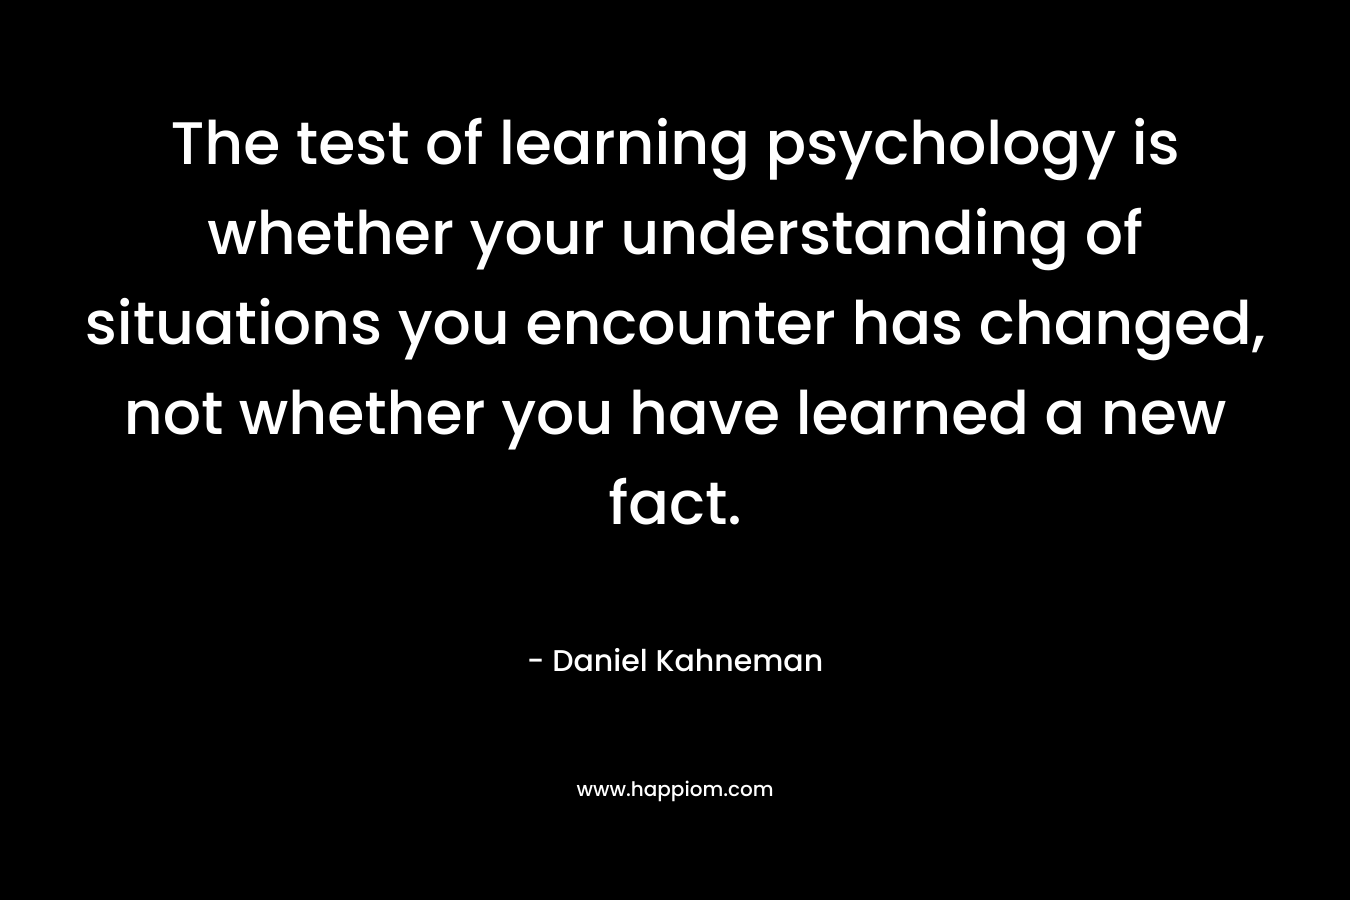 The test of learning psychology is whether your understanding of situations you encounter has changed, not whether you have learned a new fact. – Daniel Kahneman